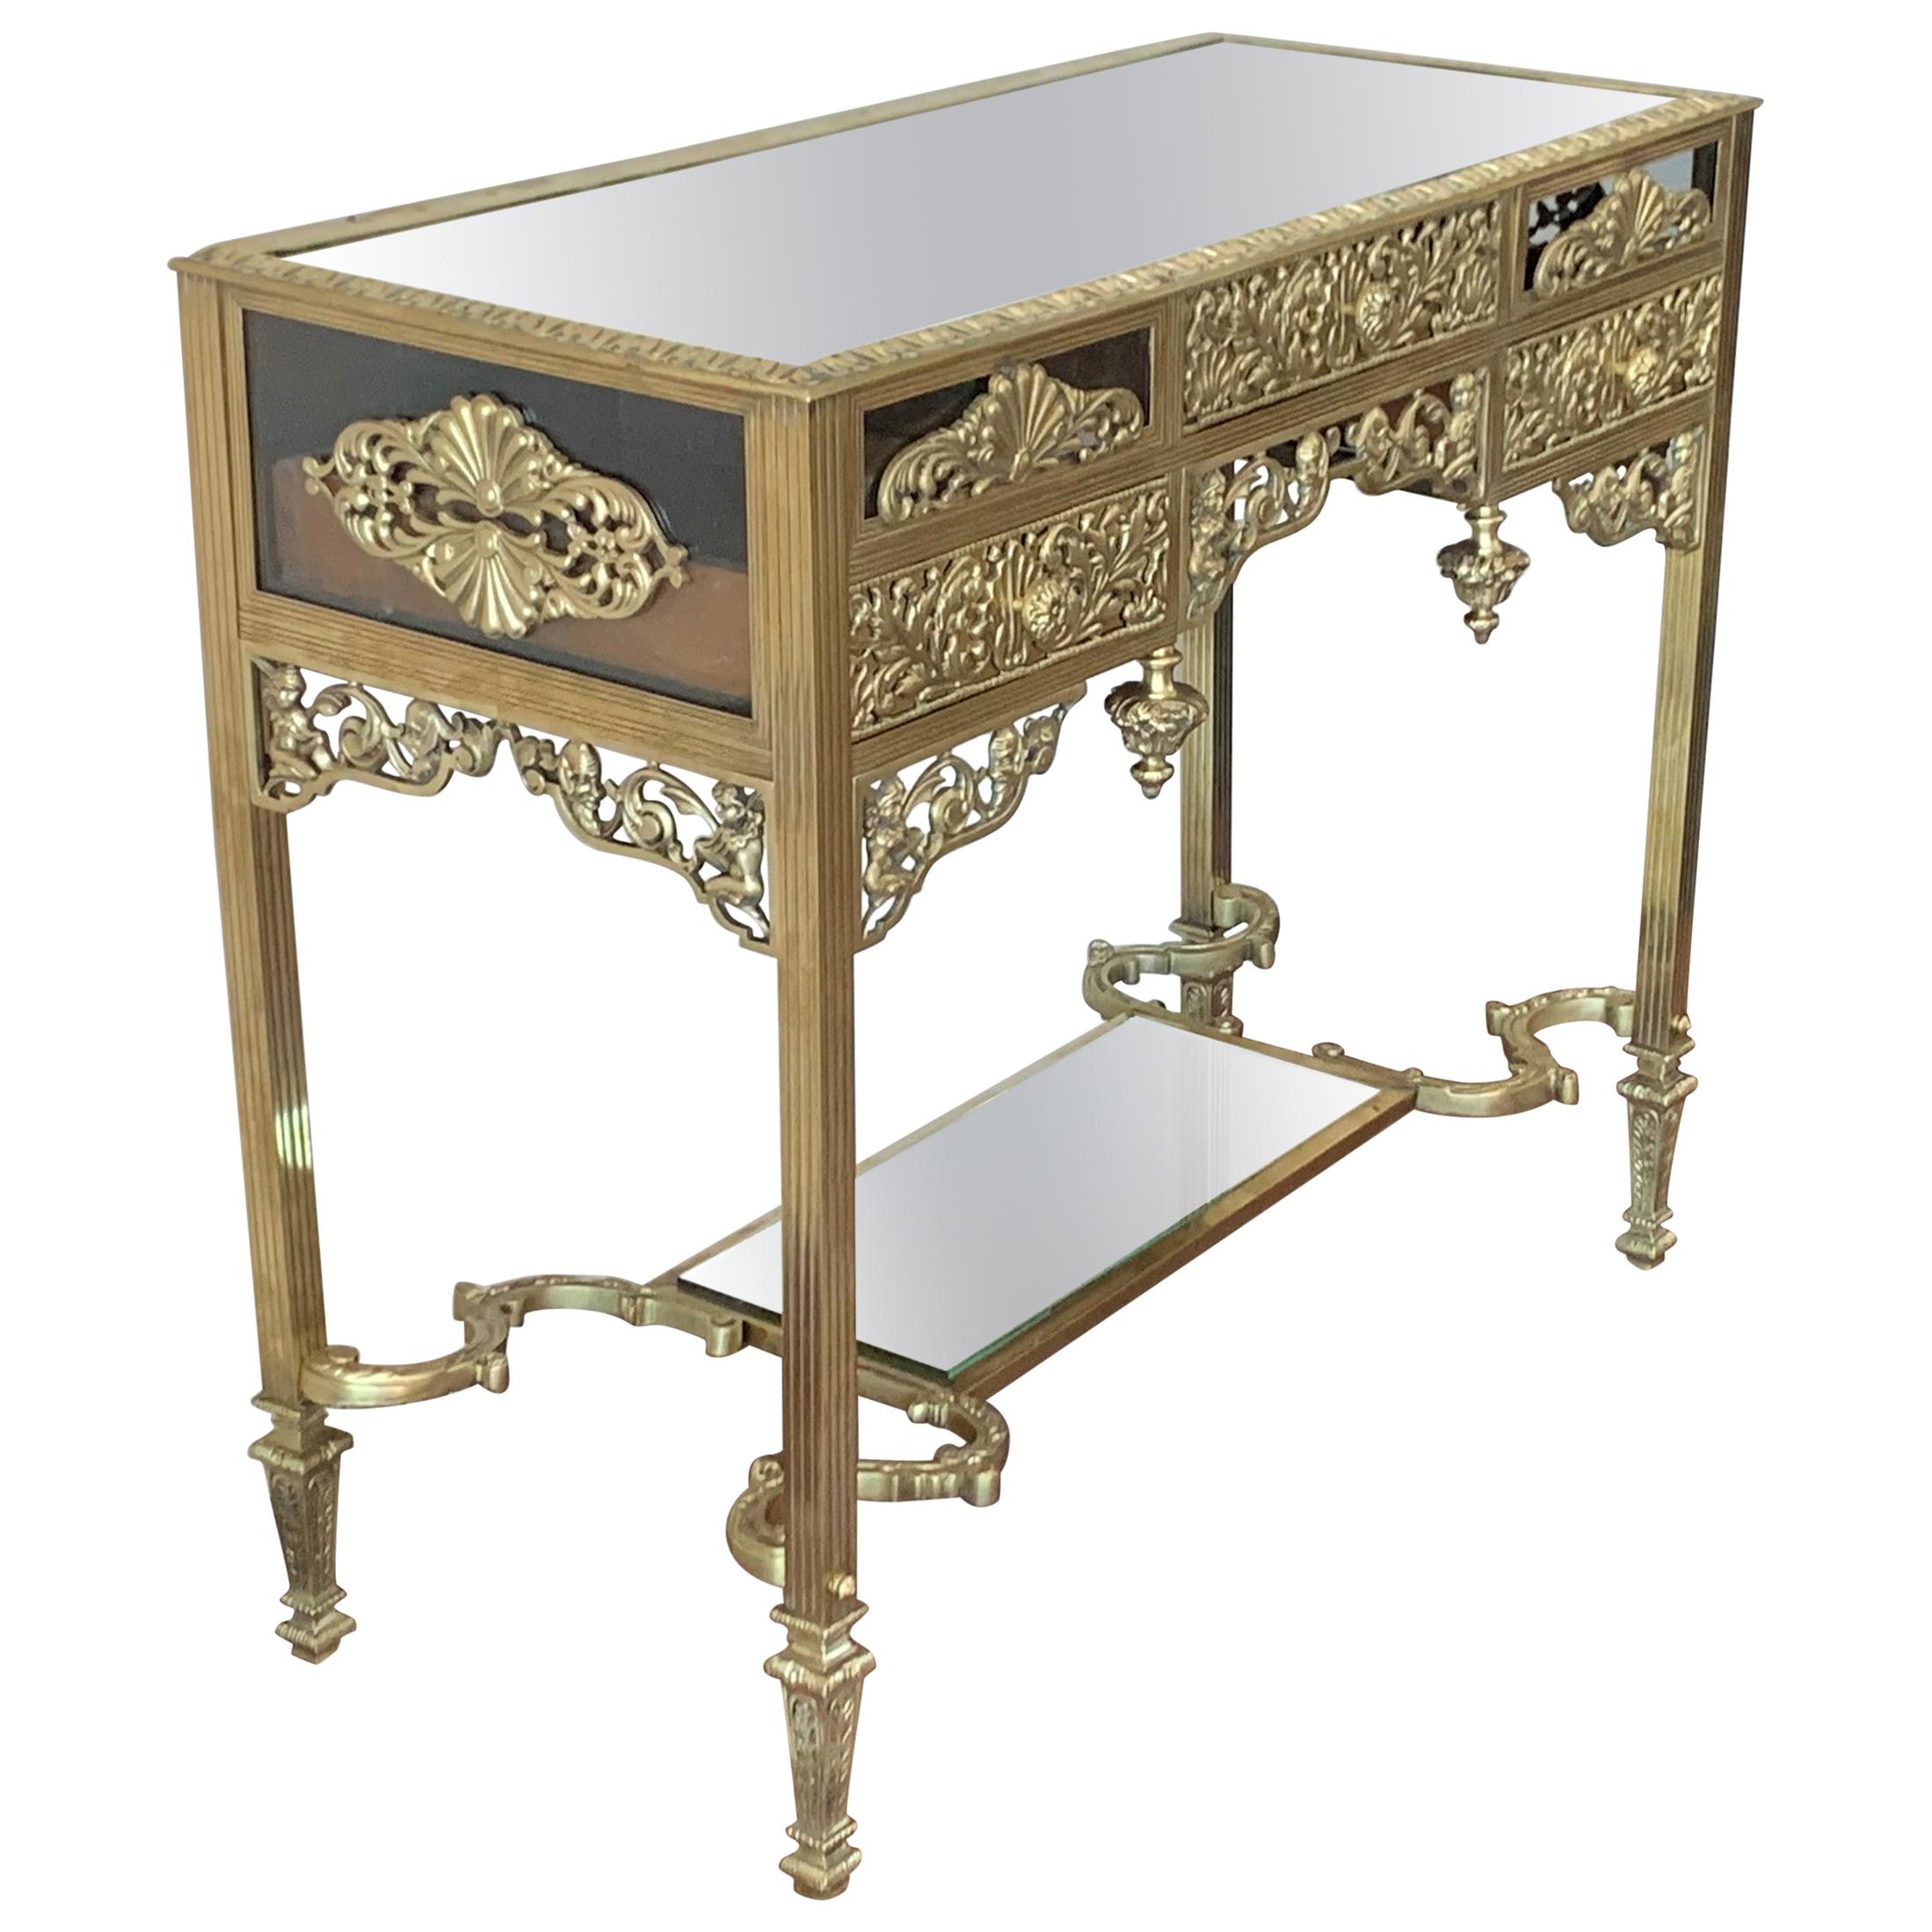 The rectangular top with rounded corners and a mirror top, mounted with an oval foliate decorated swivel bronze surmounted by a floral wreath and ribbon knot, raised on reeded legs joined by an interlaced stretcher and ending in toupie feet.